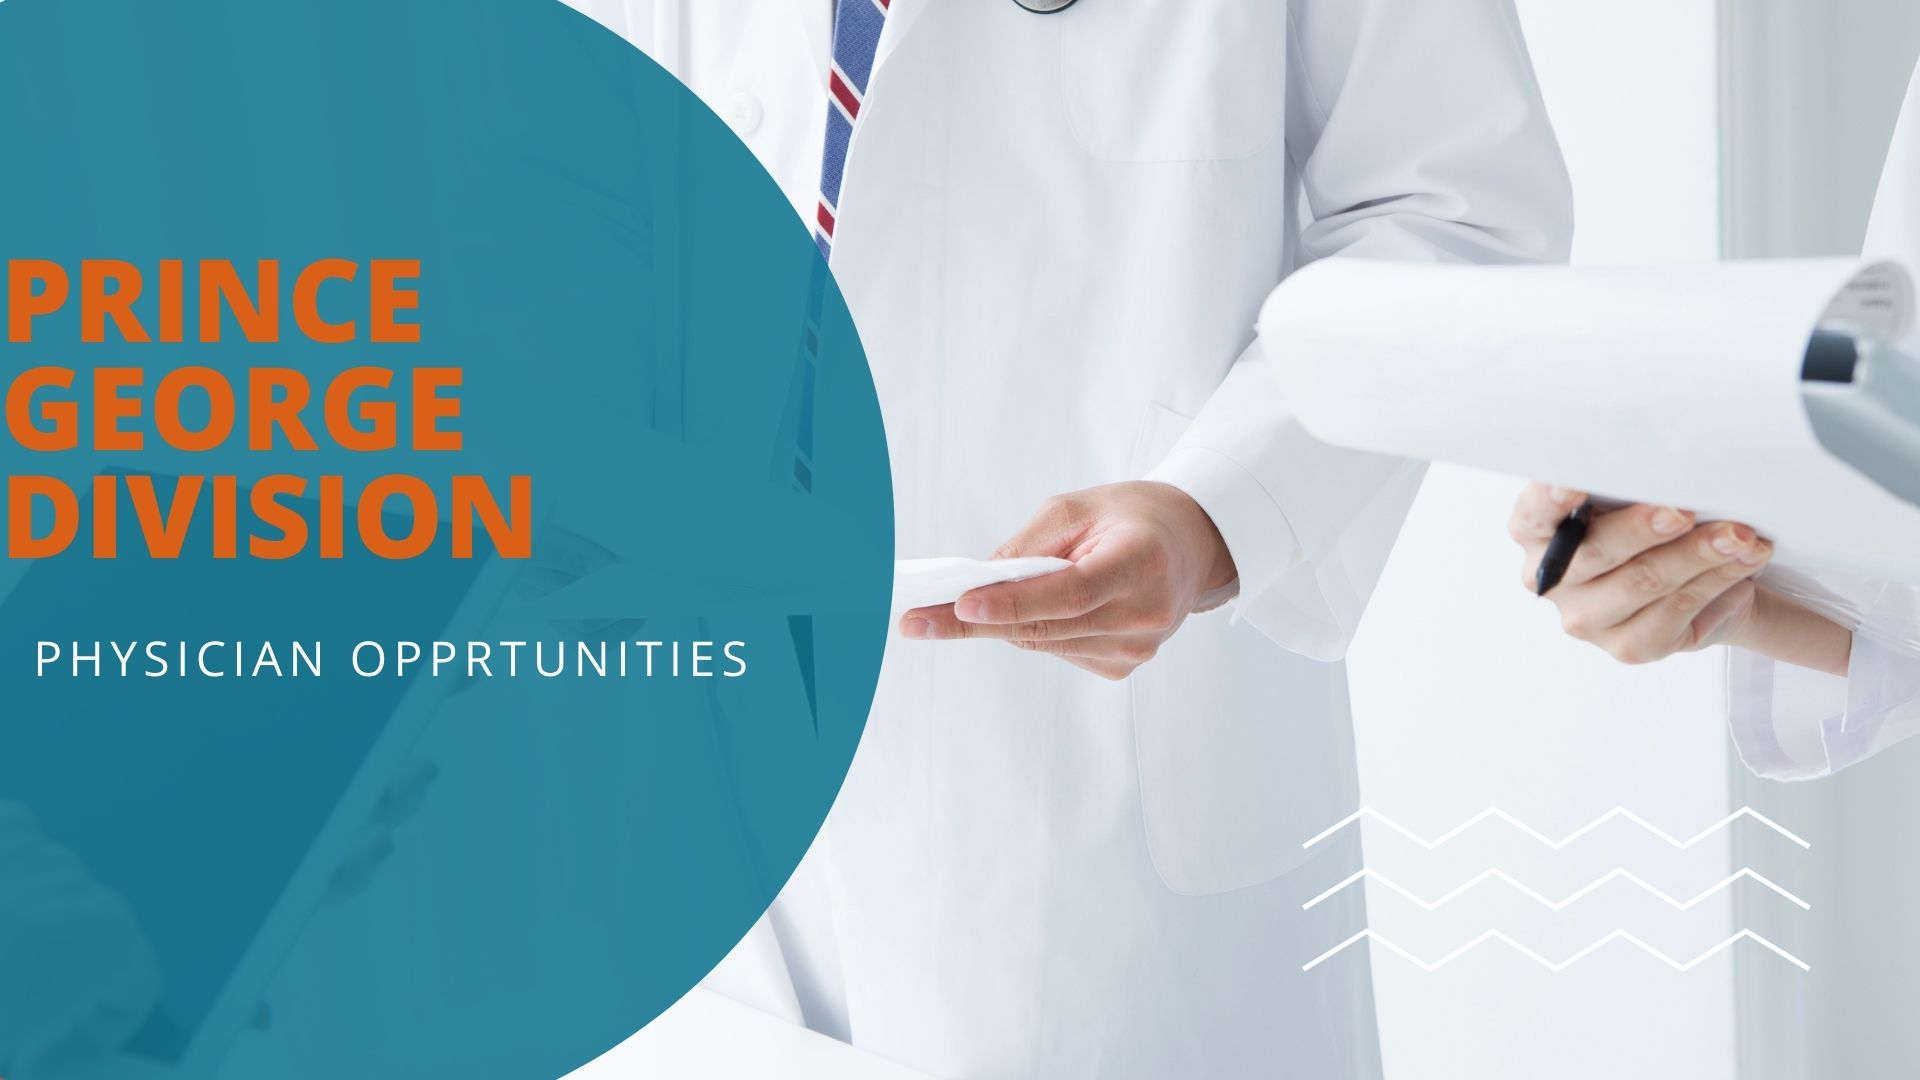 Physician opportunities